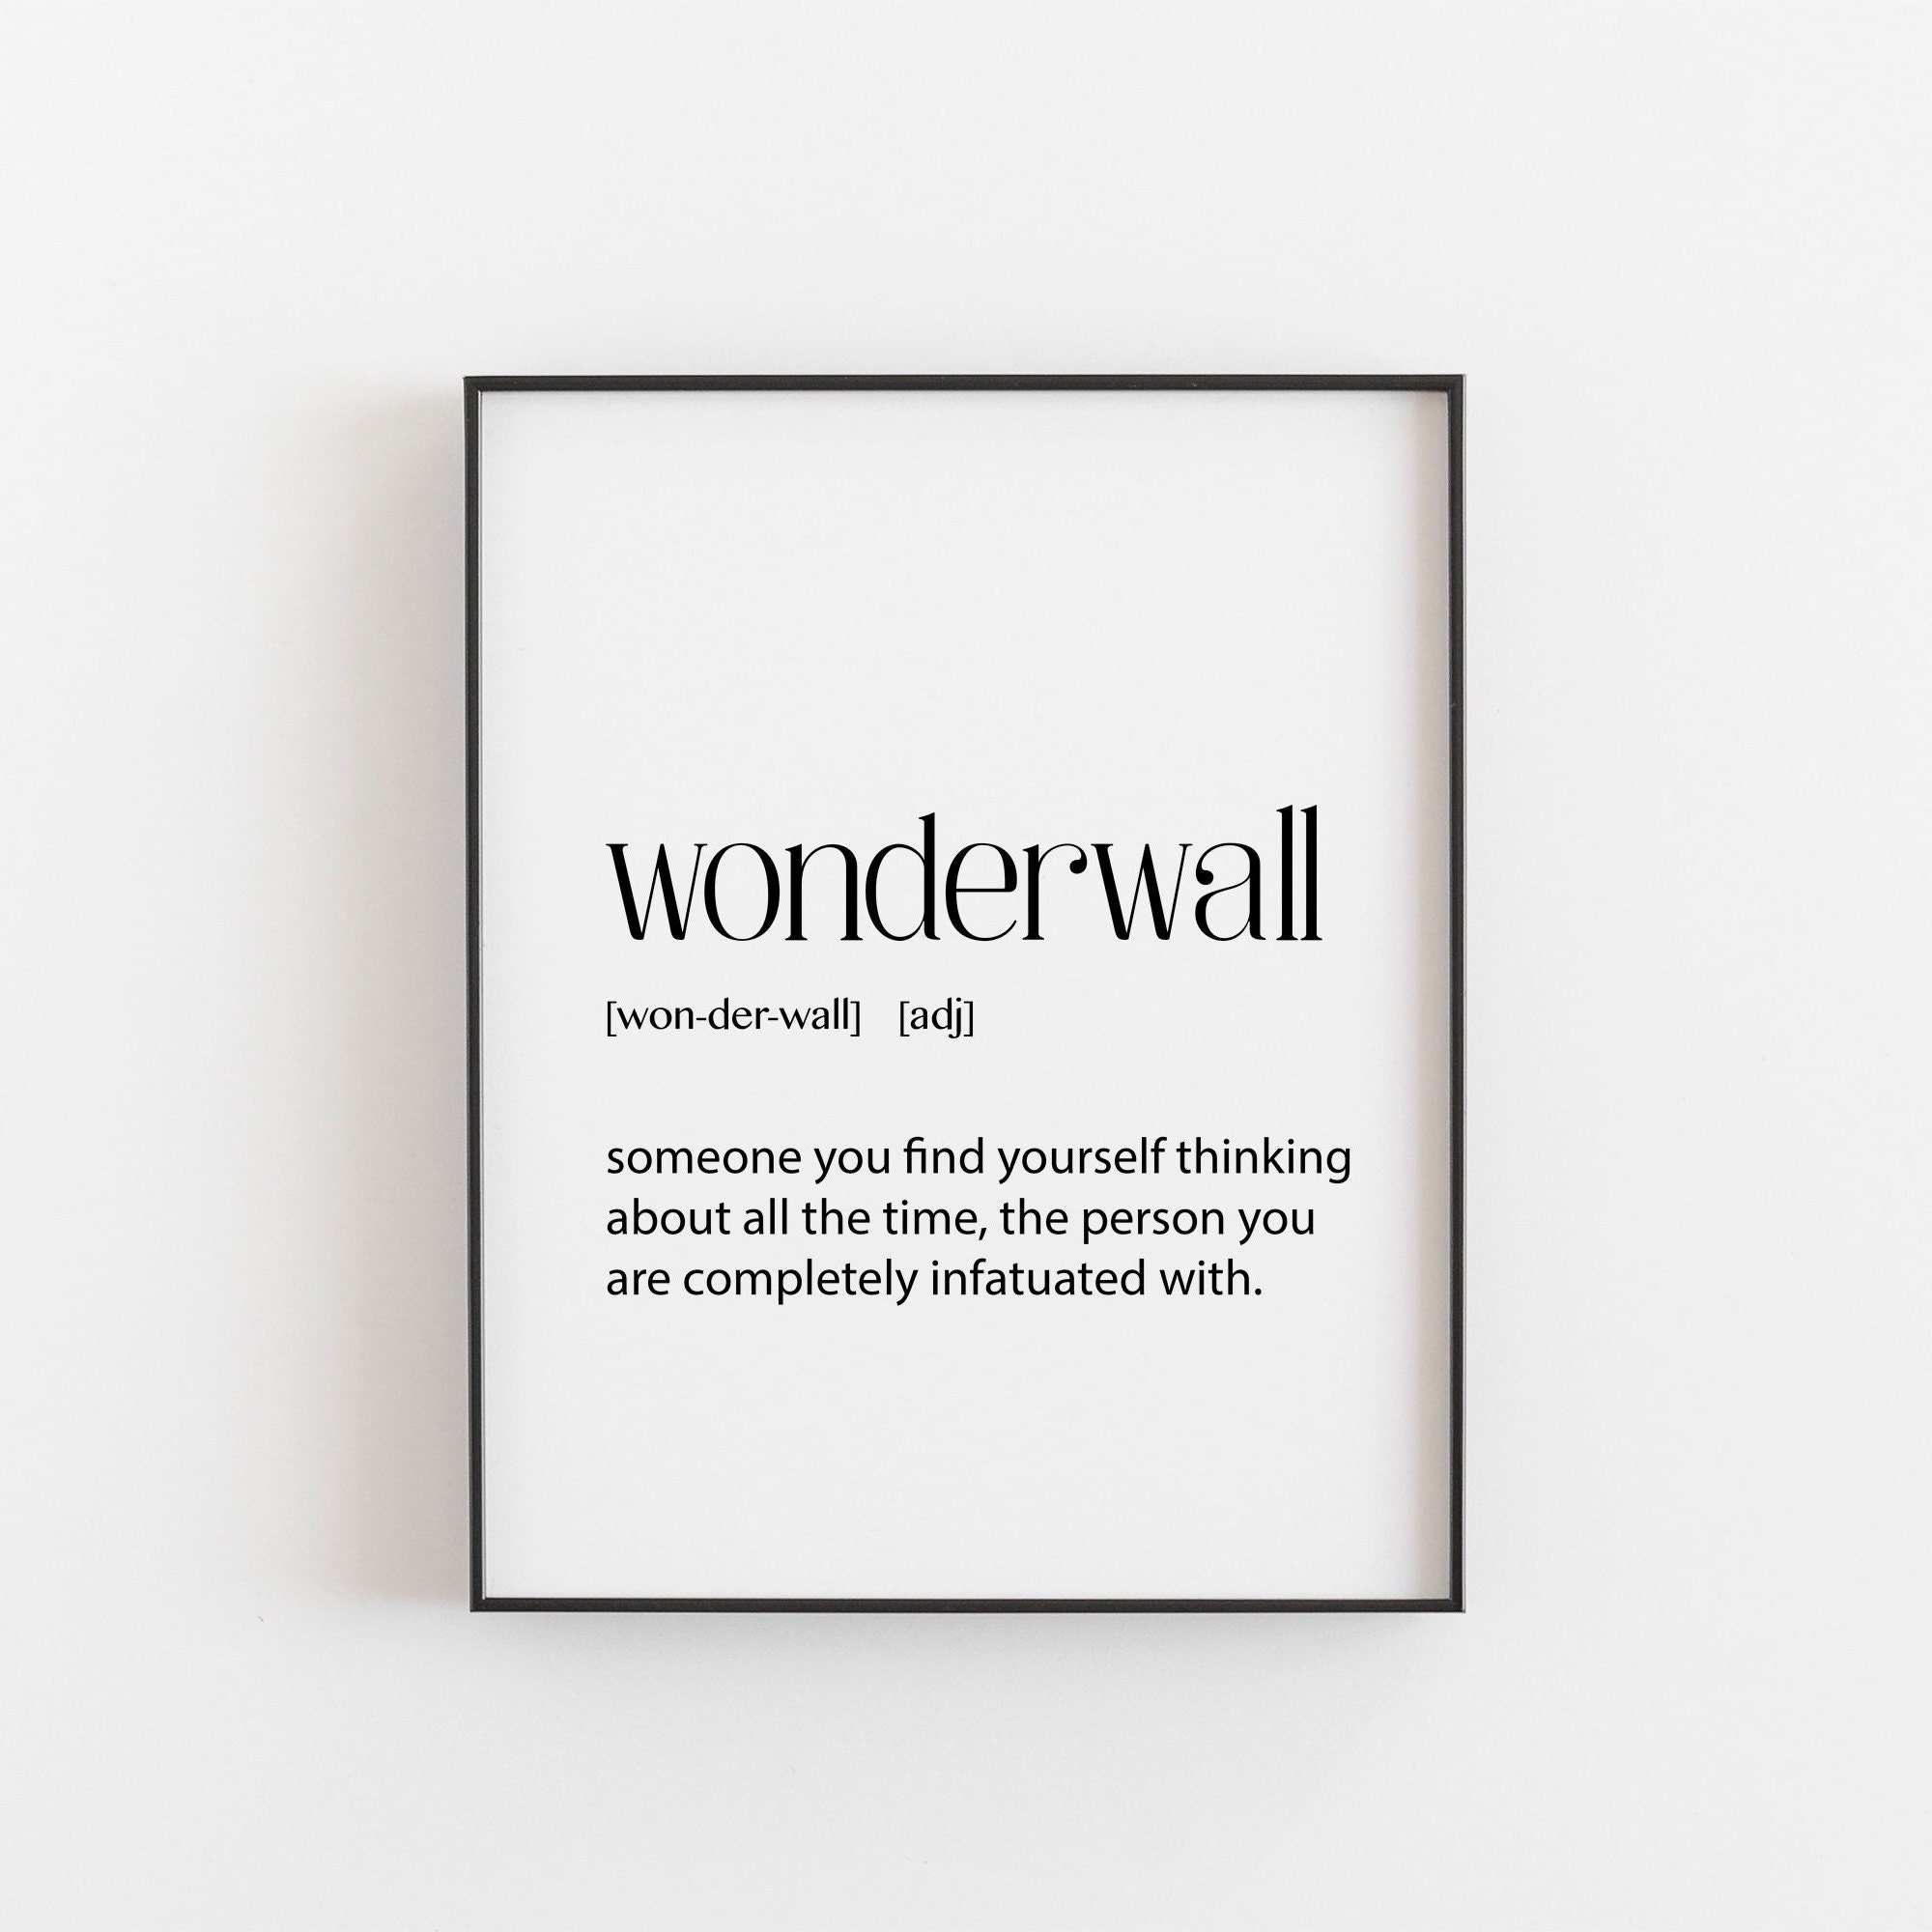 meaning of song wonderwall